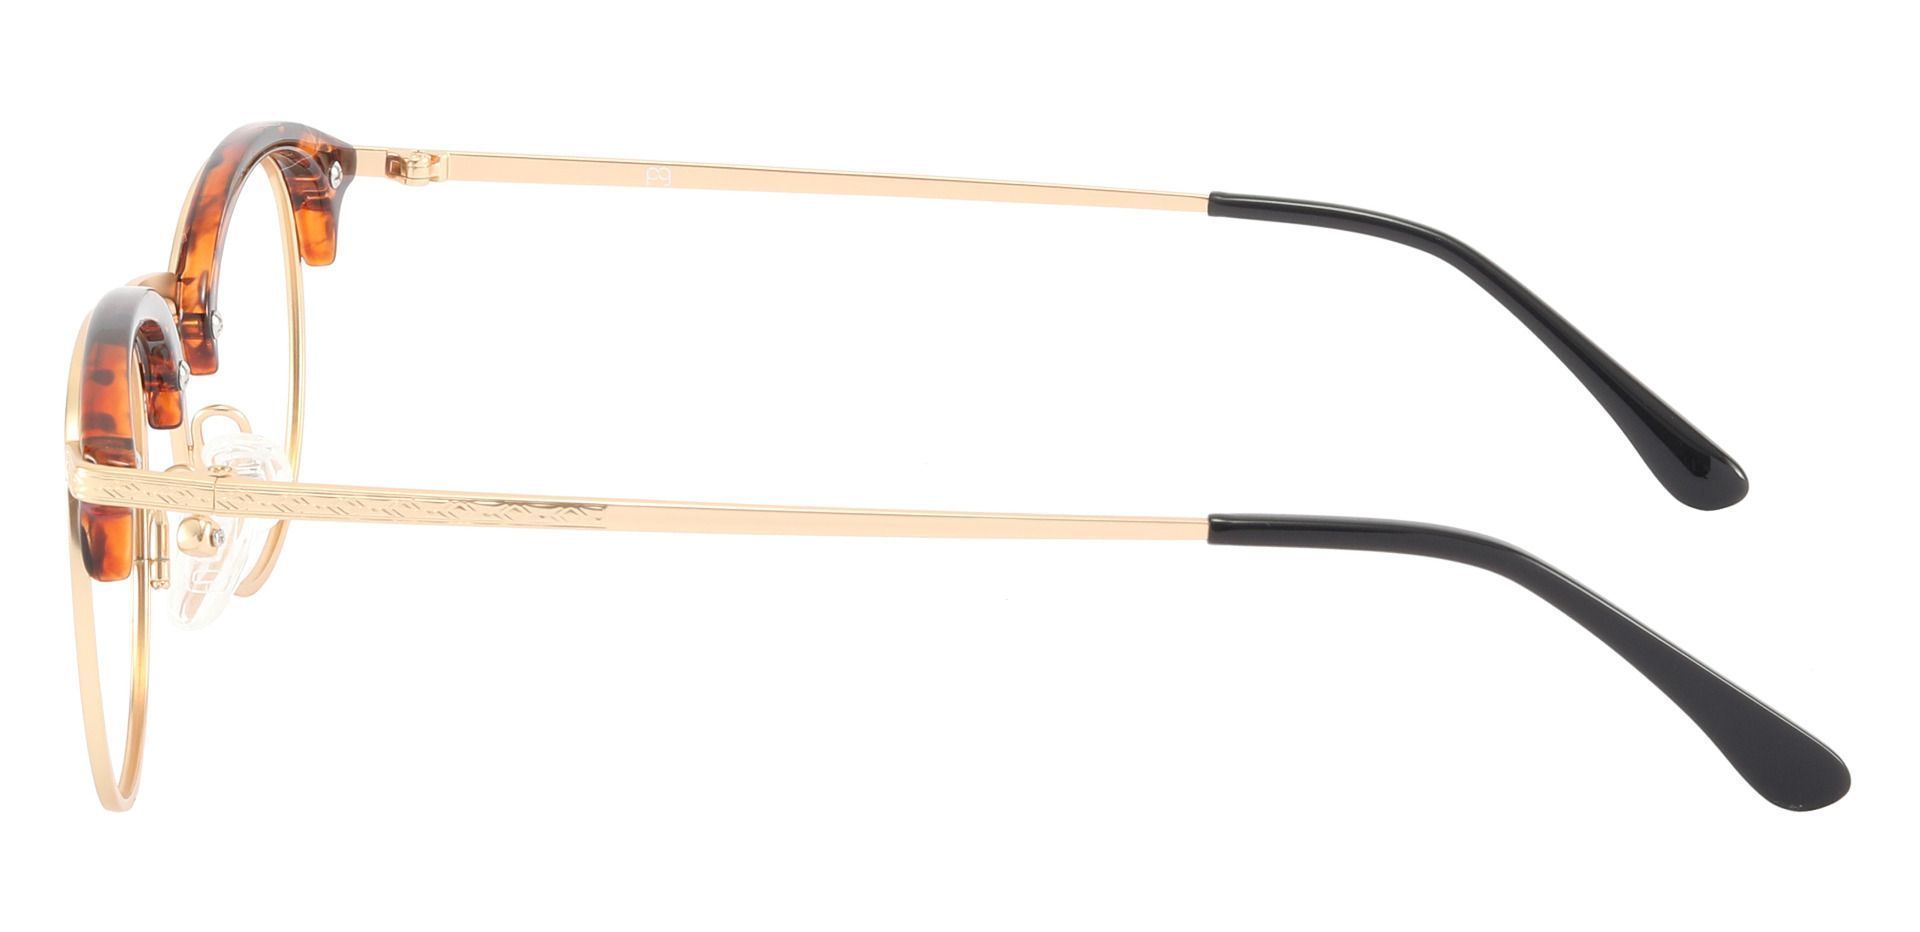 Shultz Browline Lined Bifocal Glasses - Gold